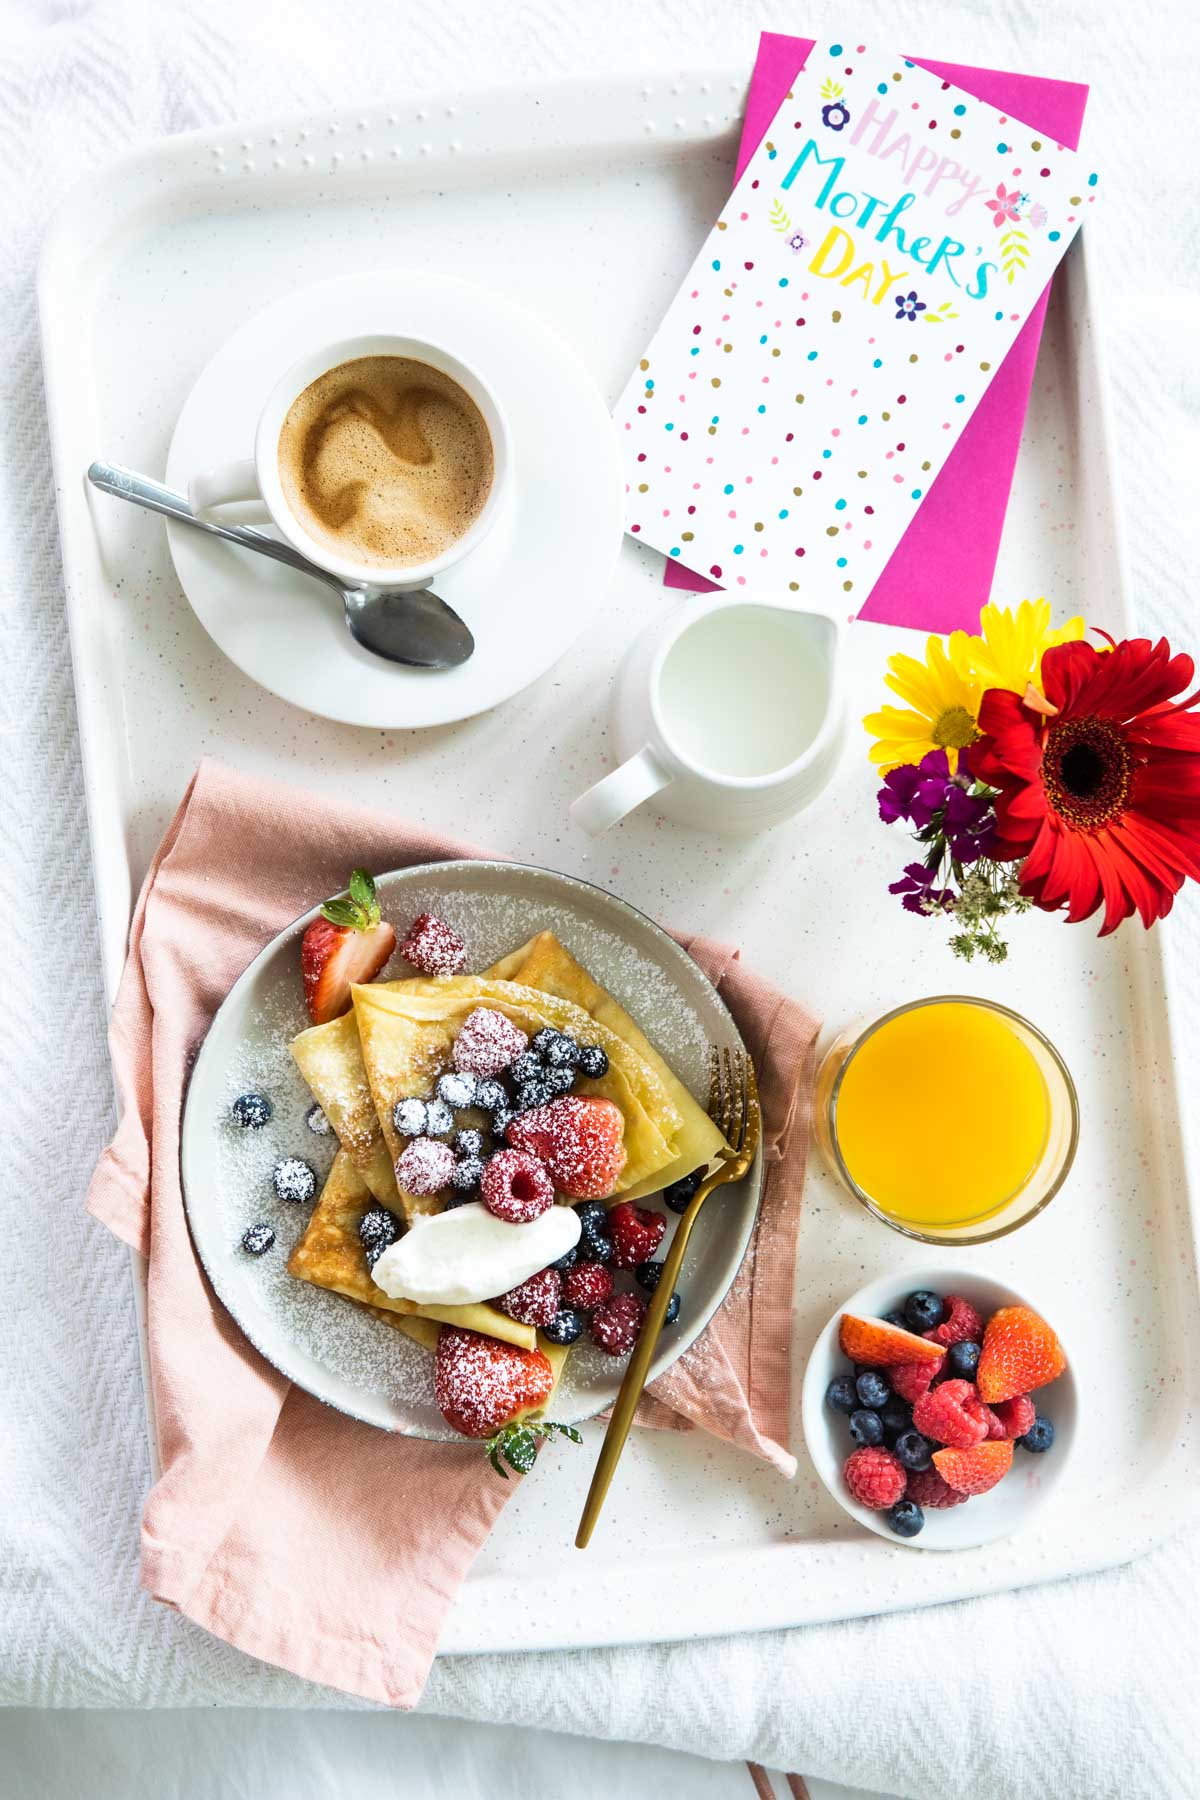 A Mother's Day breakfast tray with crepes, orange juice, coffee, fresh flowers, and a greeting card.